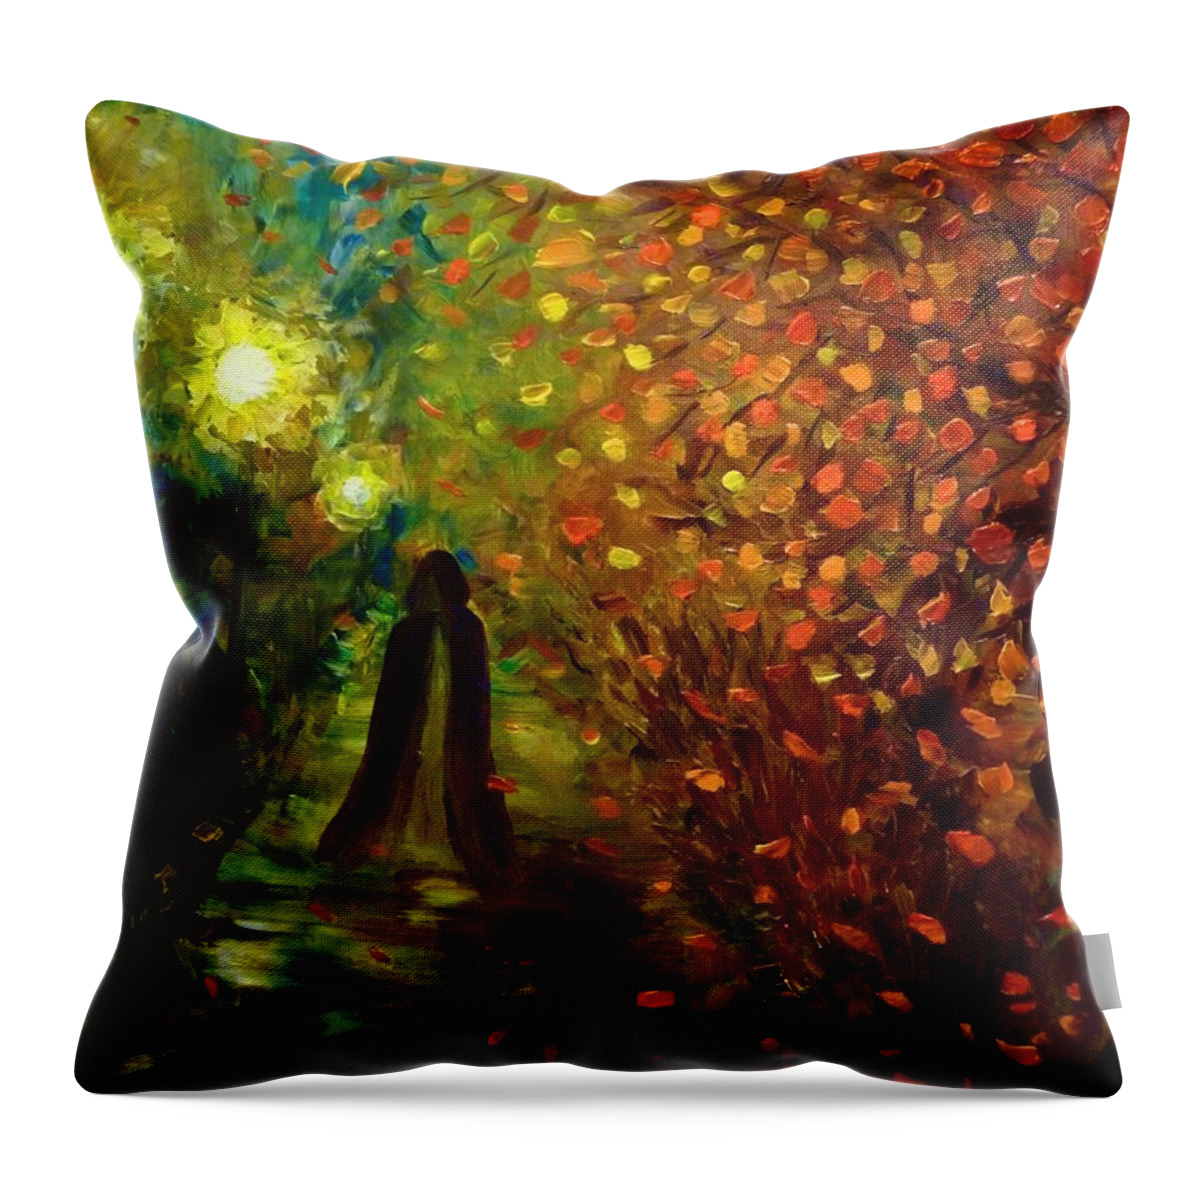 Lady Autumn Throw Pillow featuring the painting Lady Autumn by Lilia D